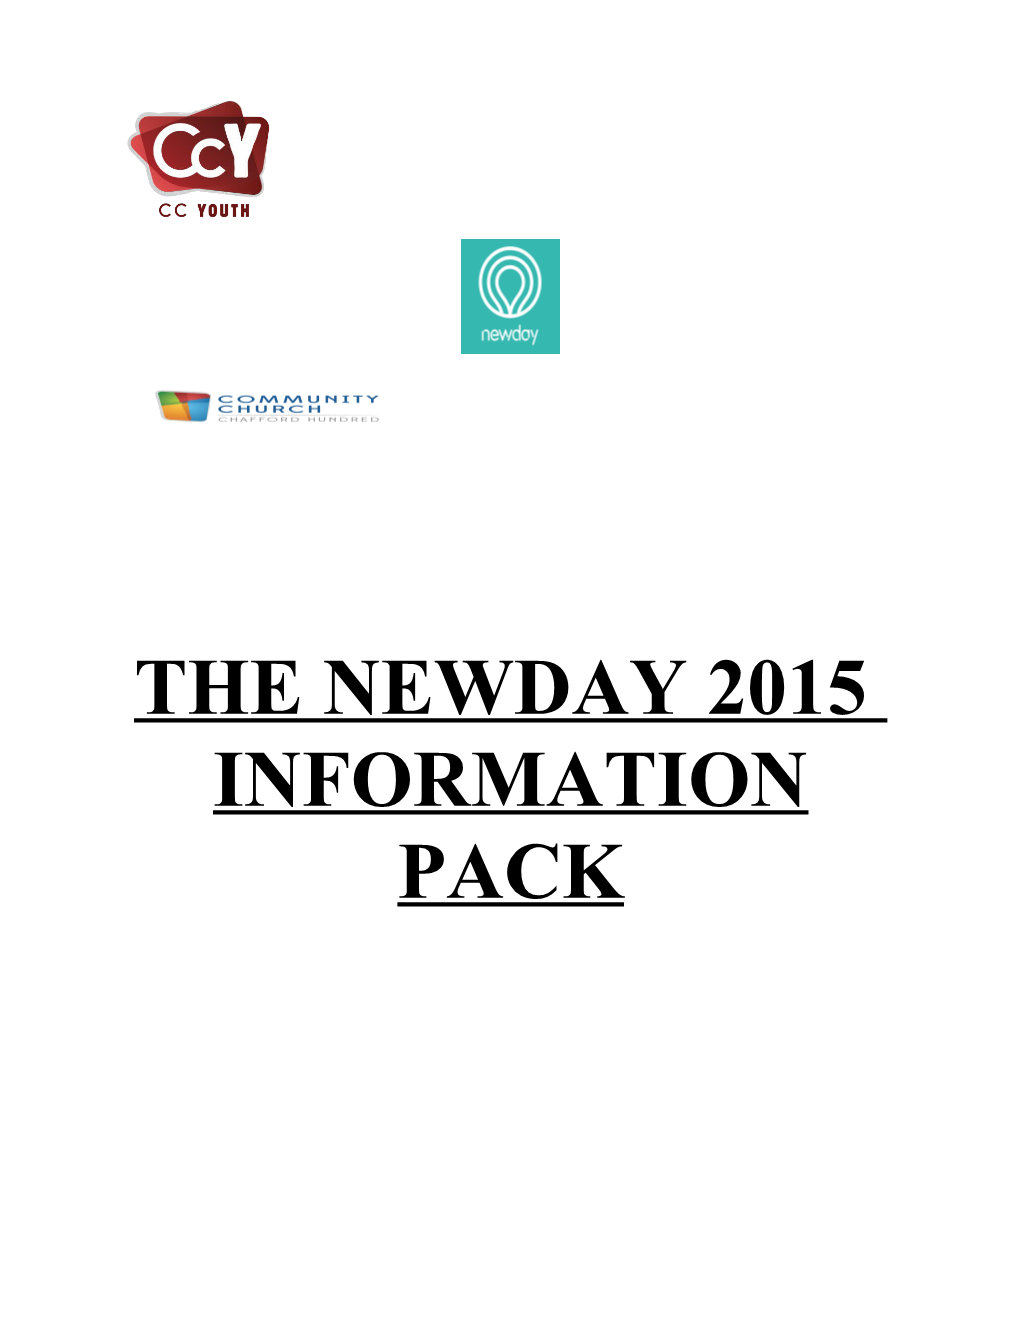 Information Pack s1